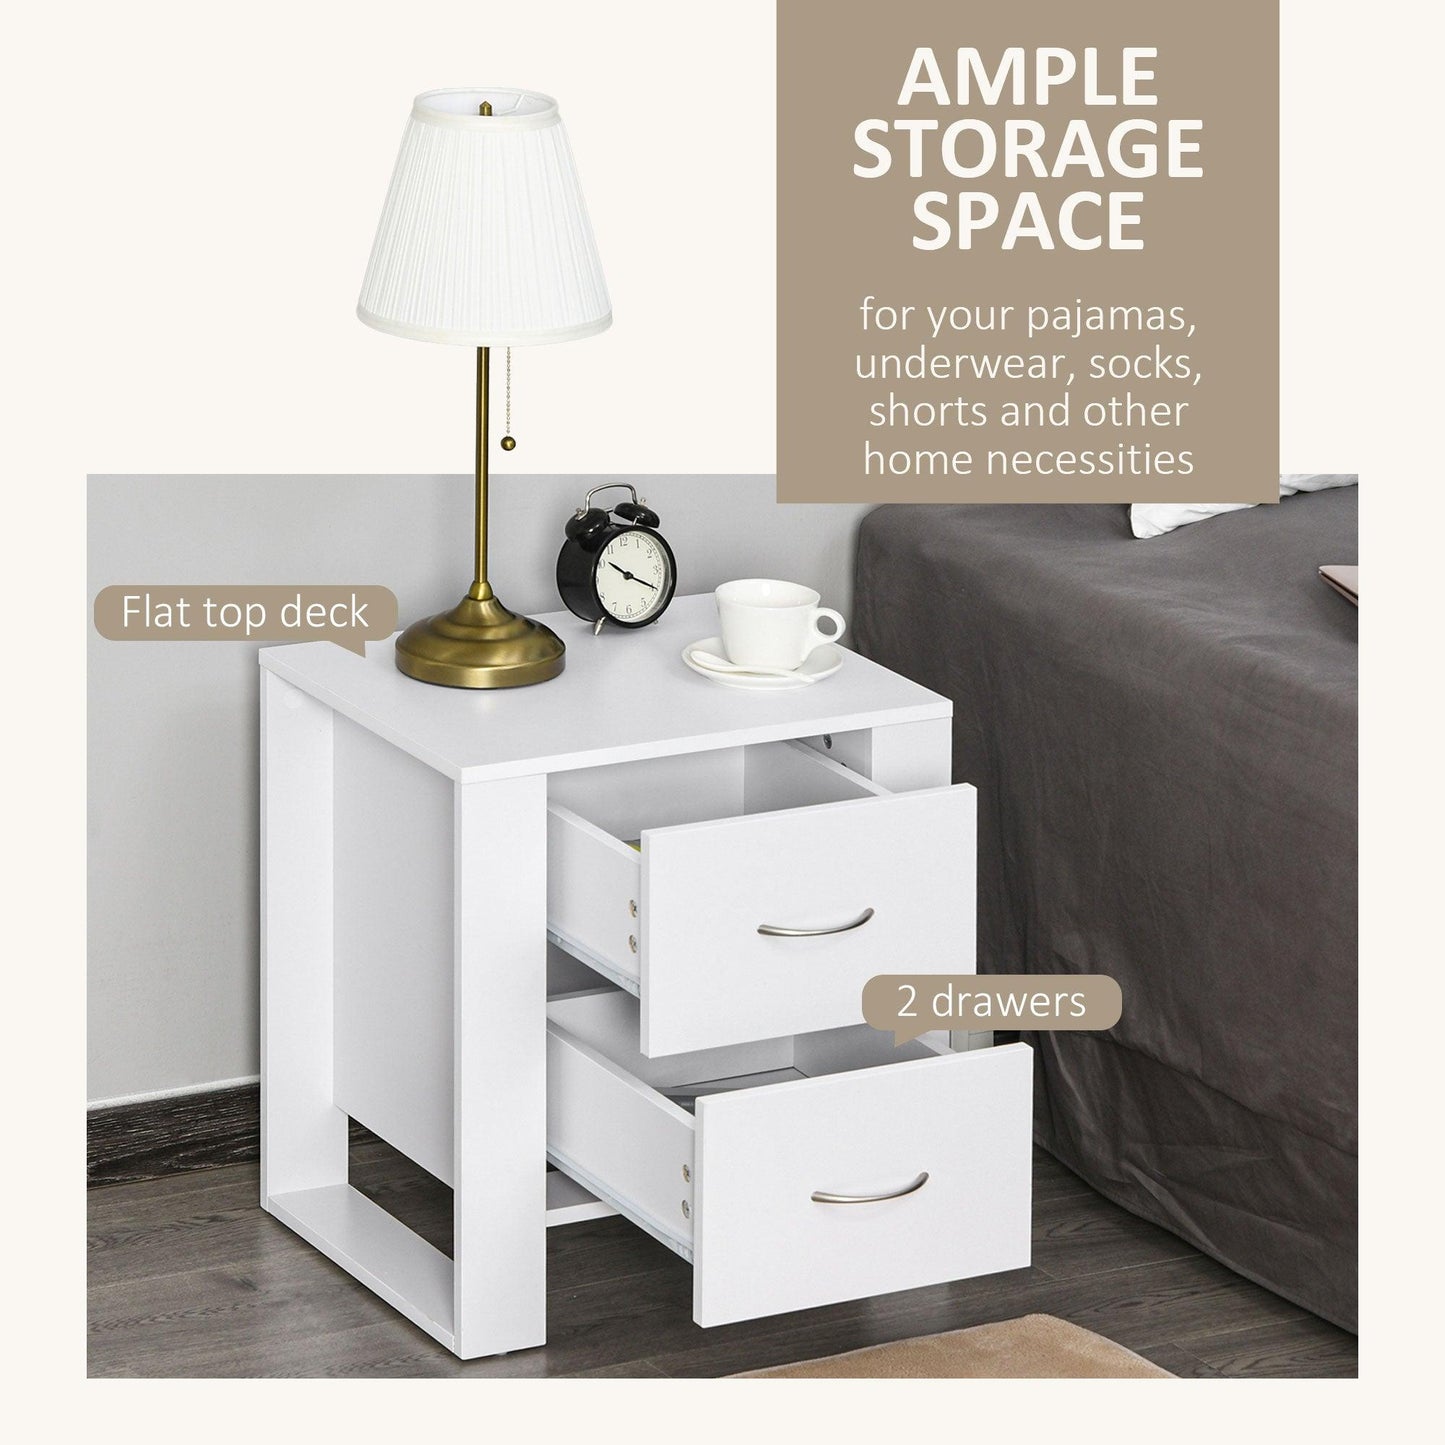 HOMCOM Set of 2 White Bedside Tables with Drawers and Handles - ALL4U RETAILER LTD